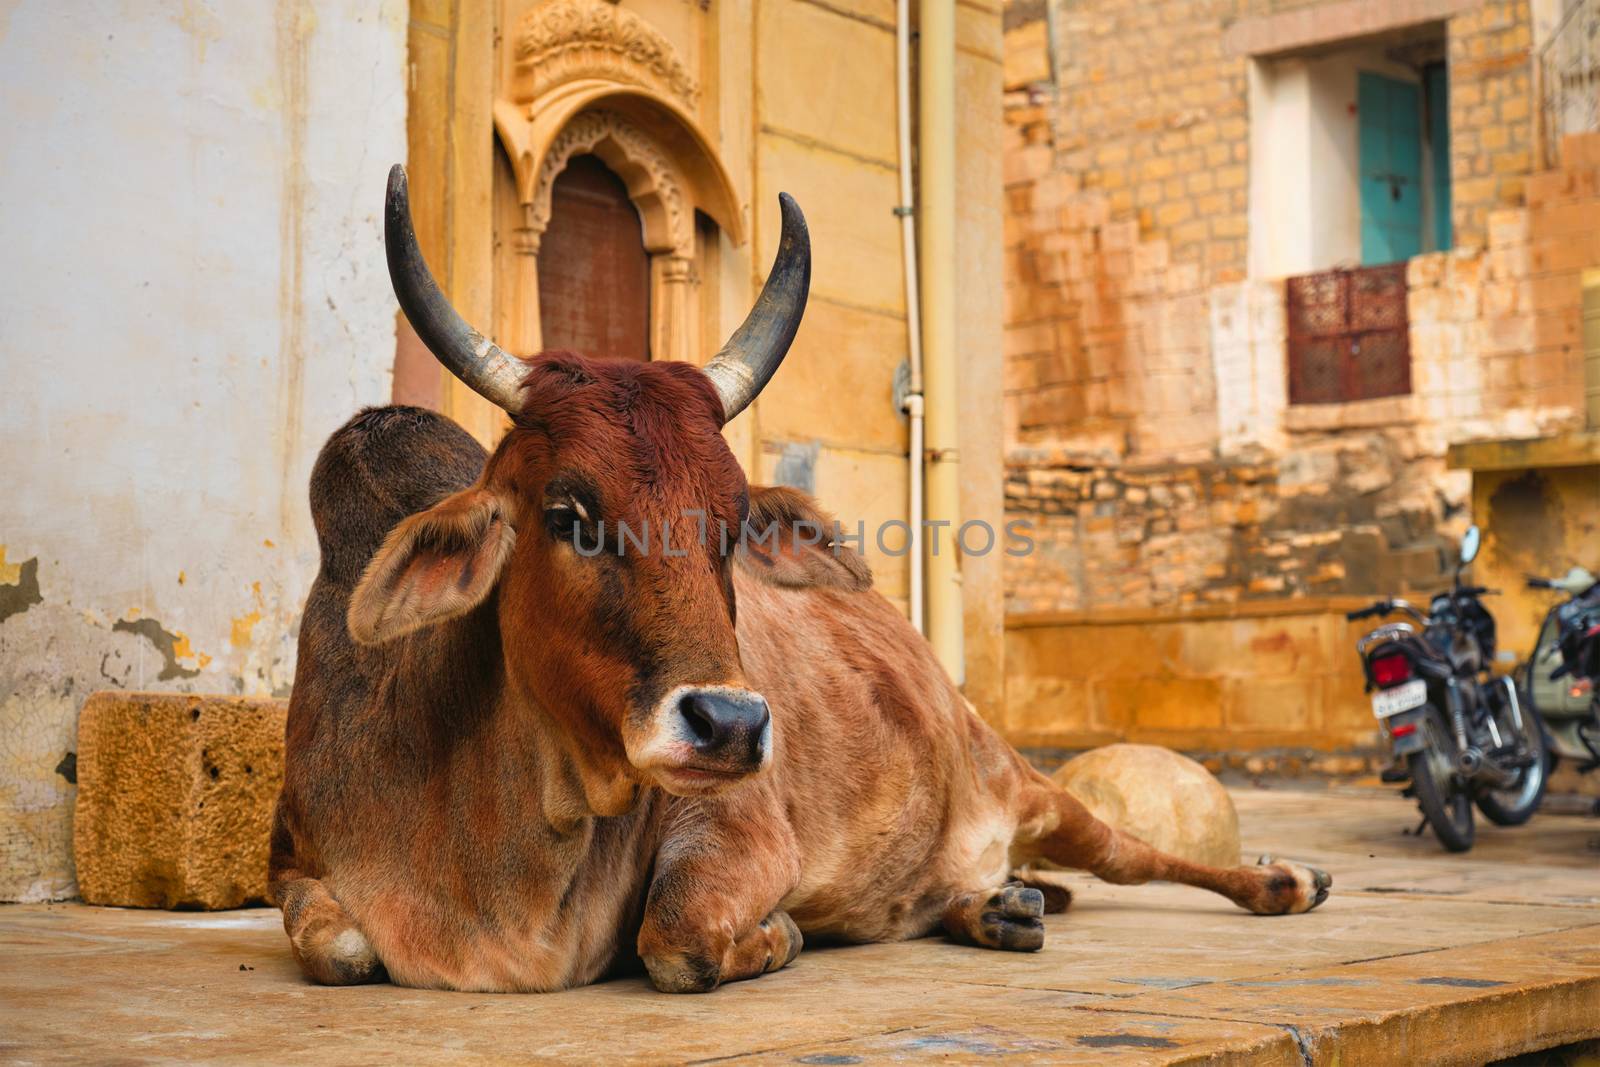 Indian cow resting sleeping in the street. Cow is a sacred animal in India. Jasialmer fort, Rajasthan, India